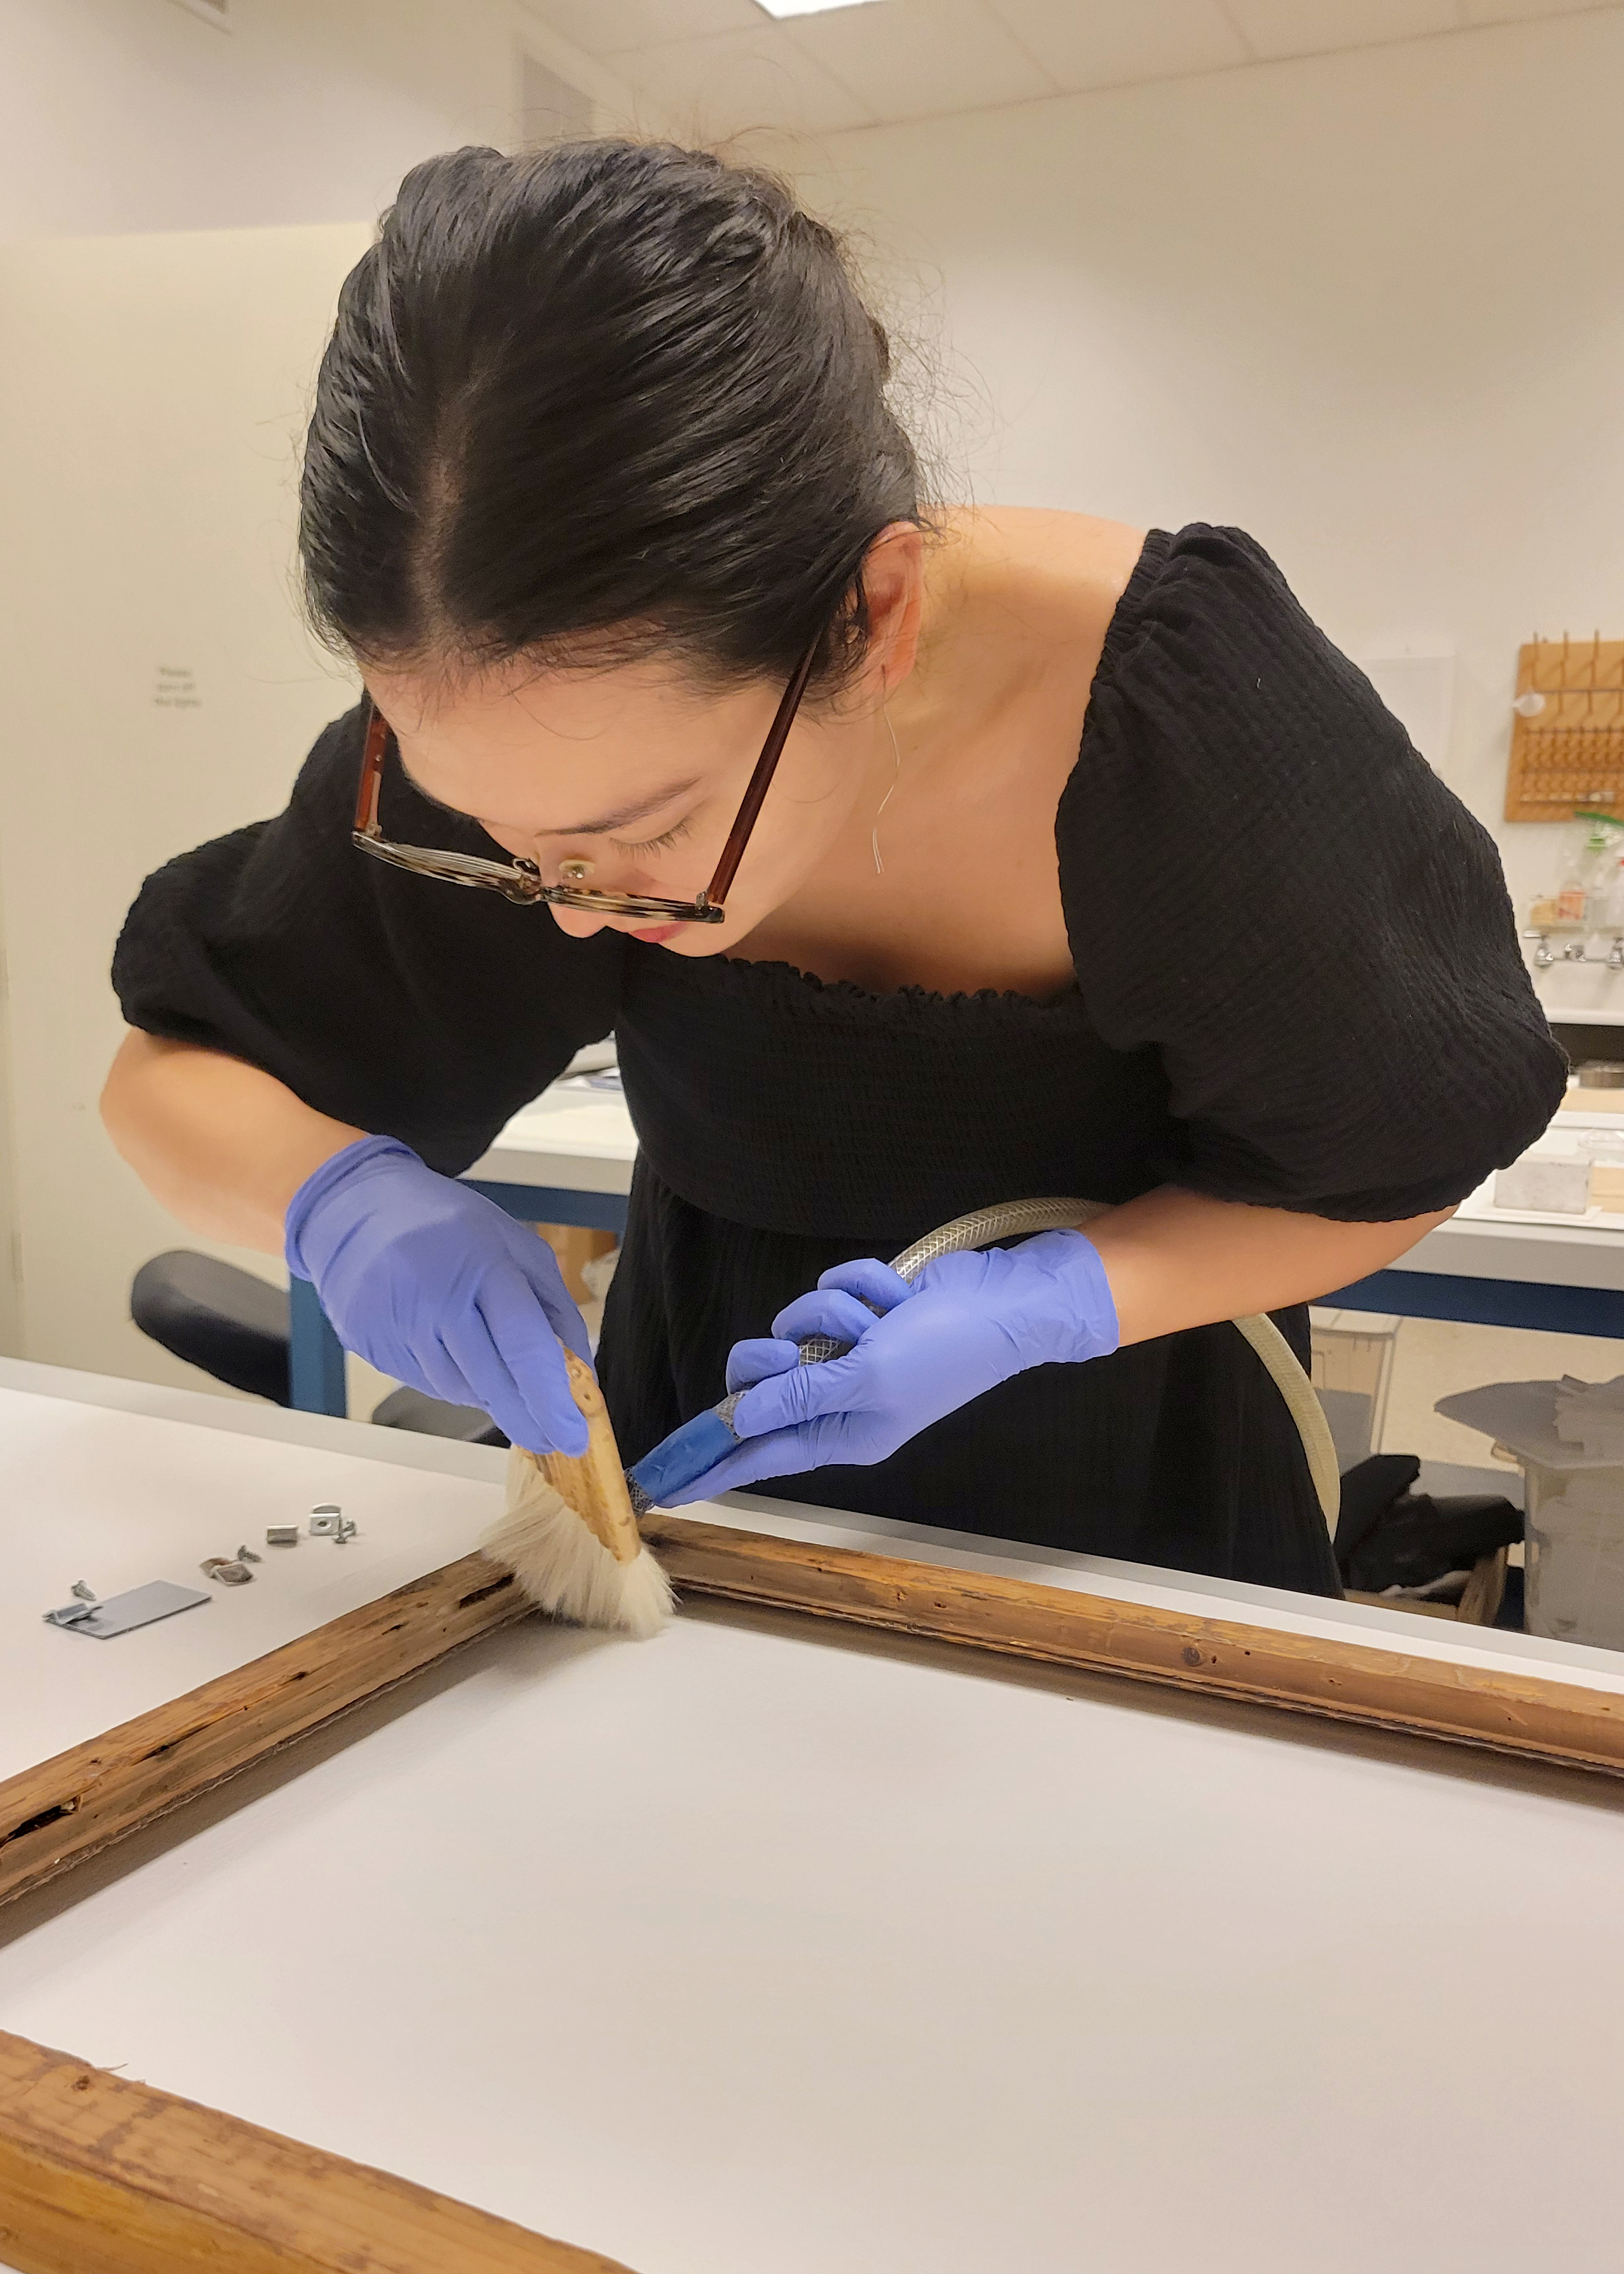 Director of collections, Stacey Kelly carefully brushes a wooden frame.